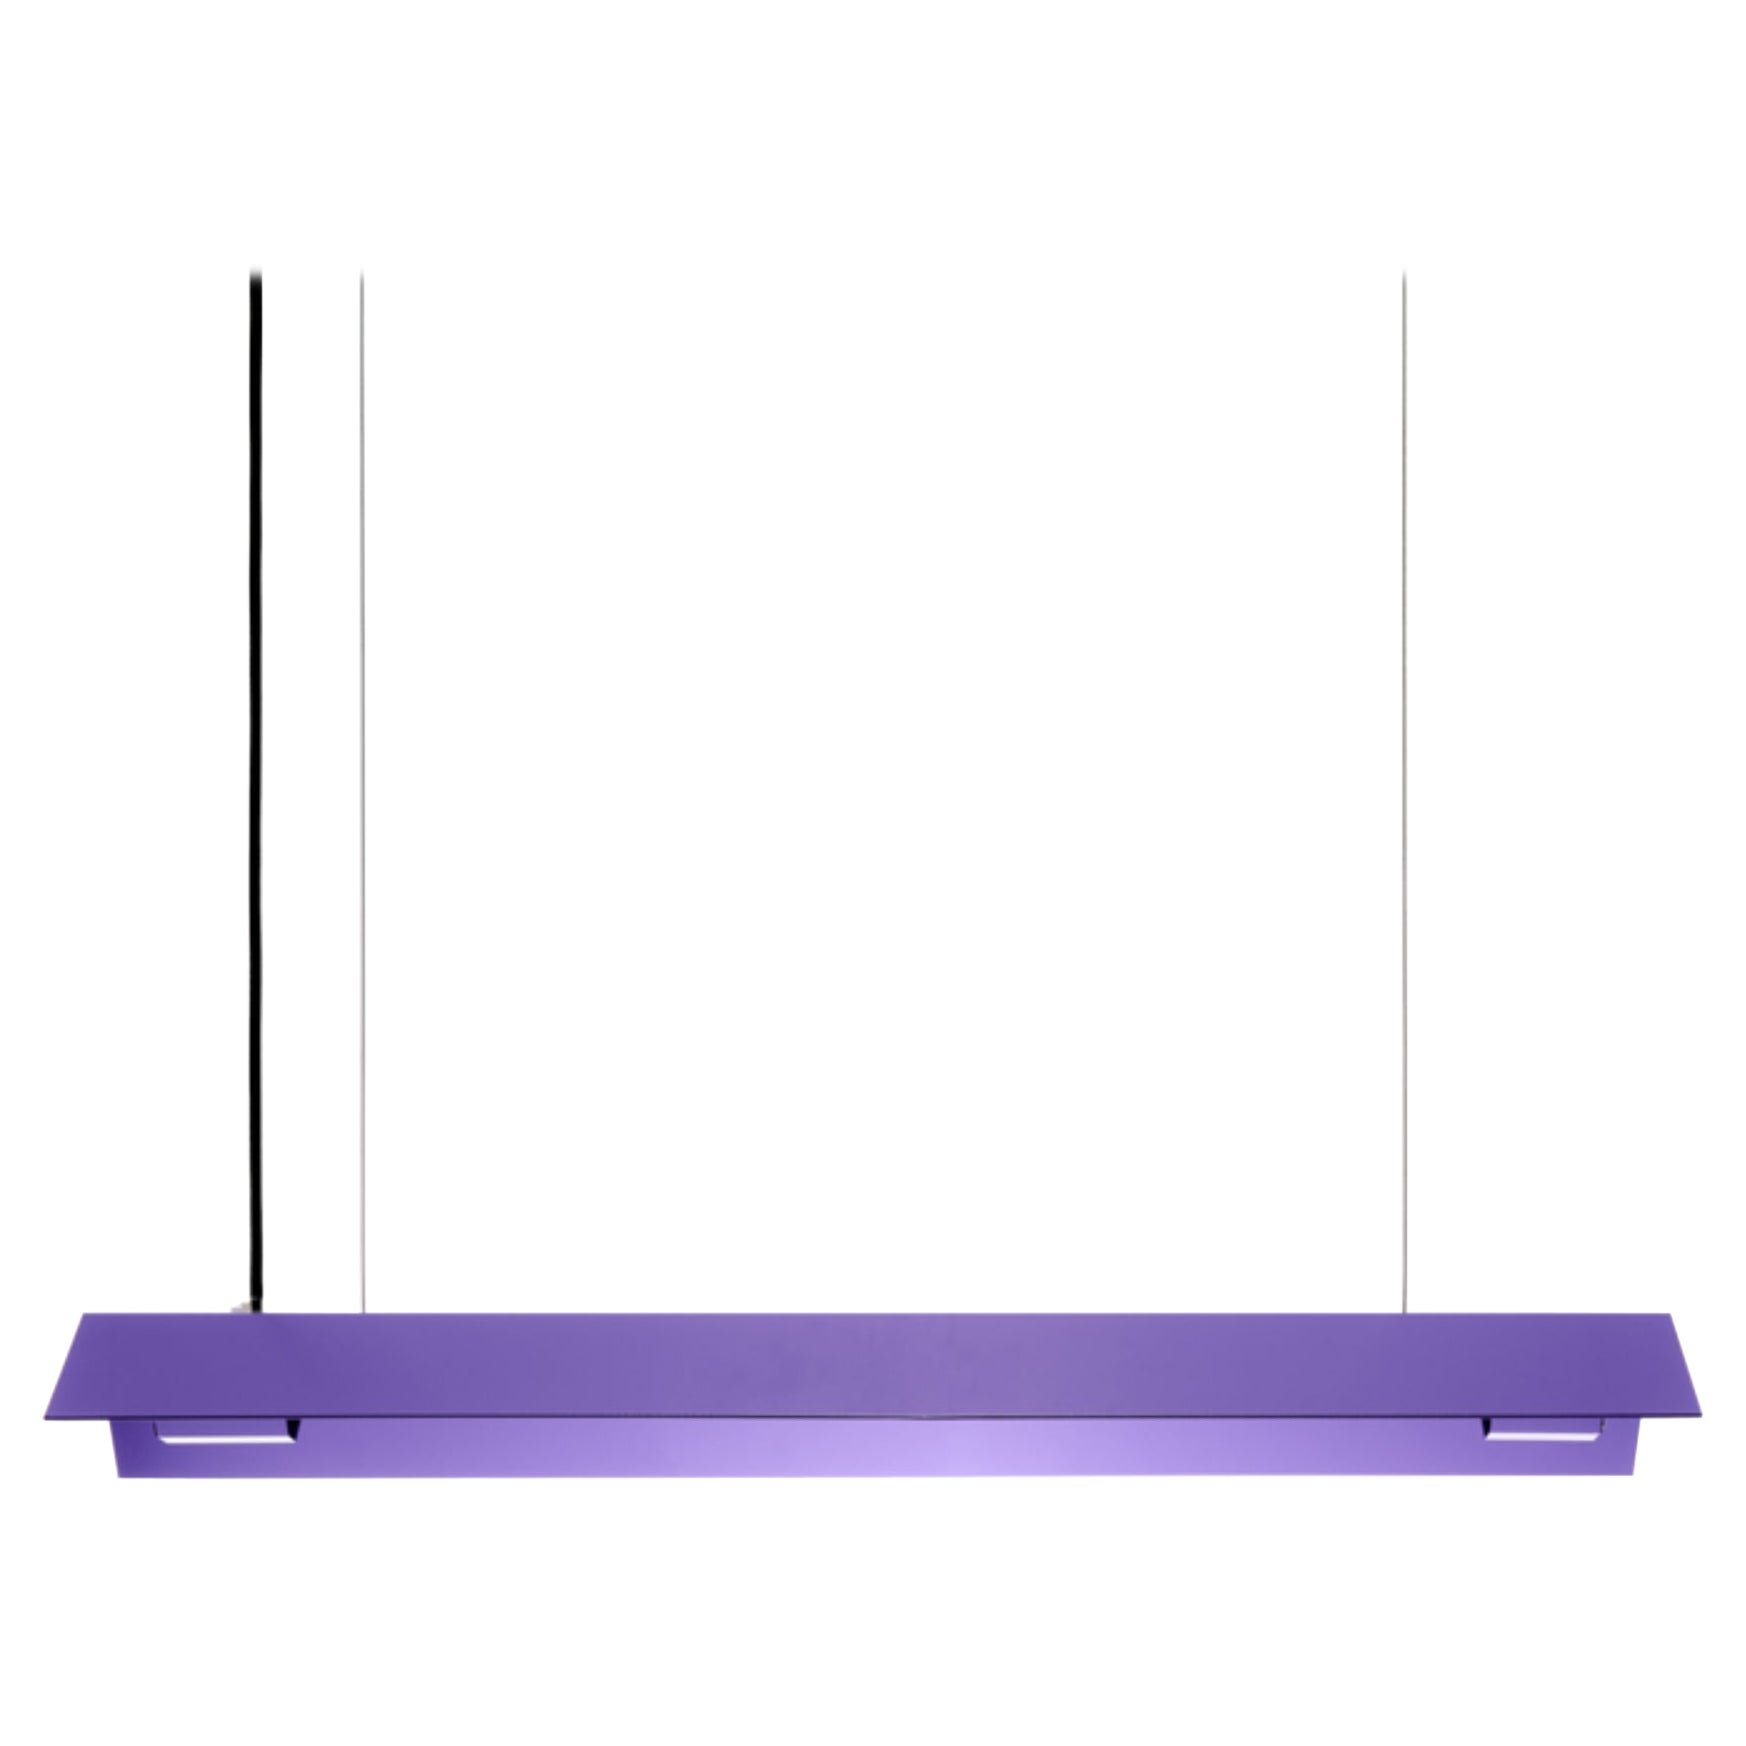 Small Misalliance Ral Lavender Suspended Light by Lexavala For Sale